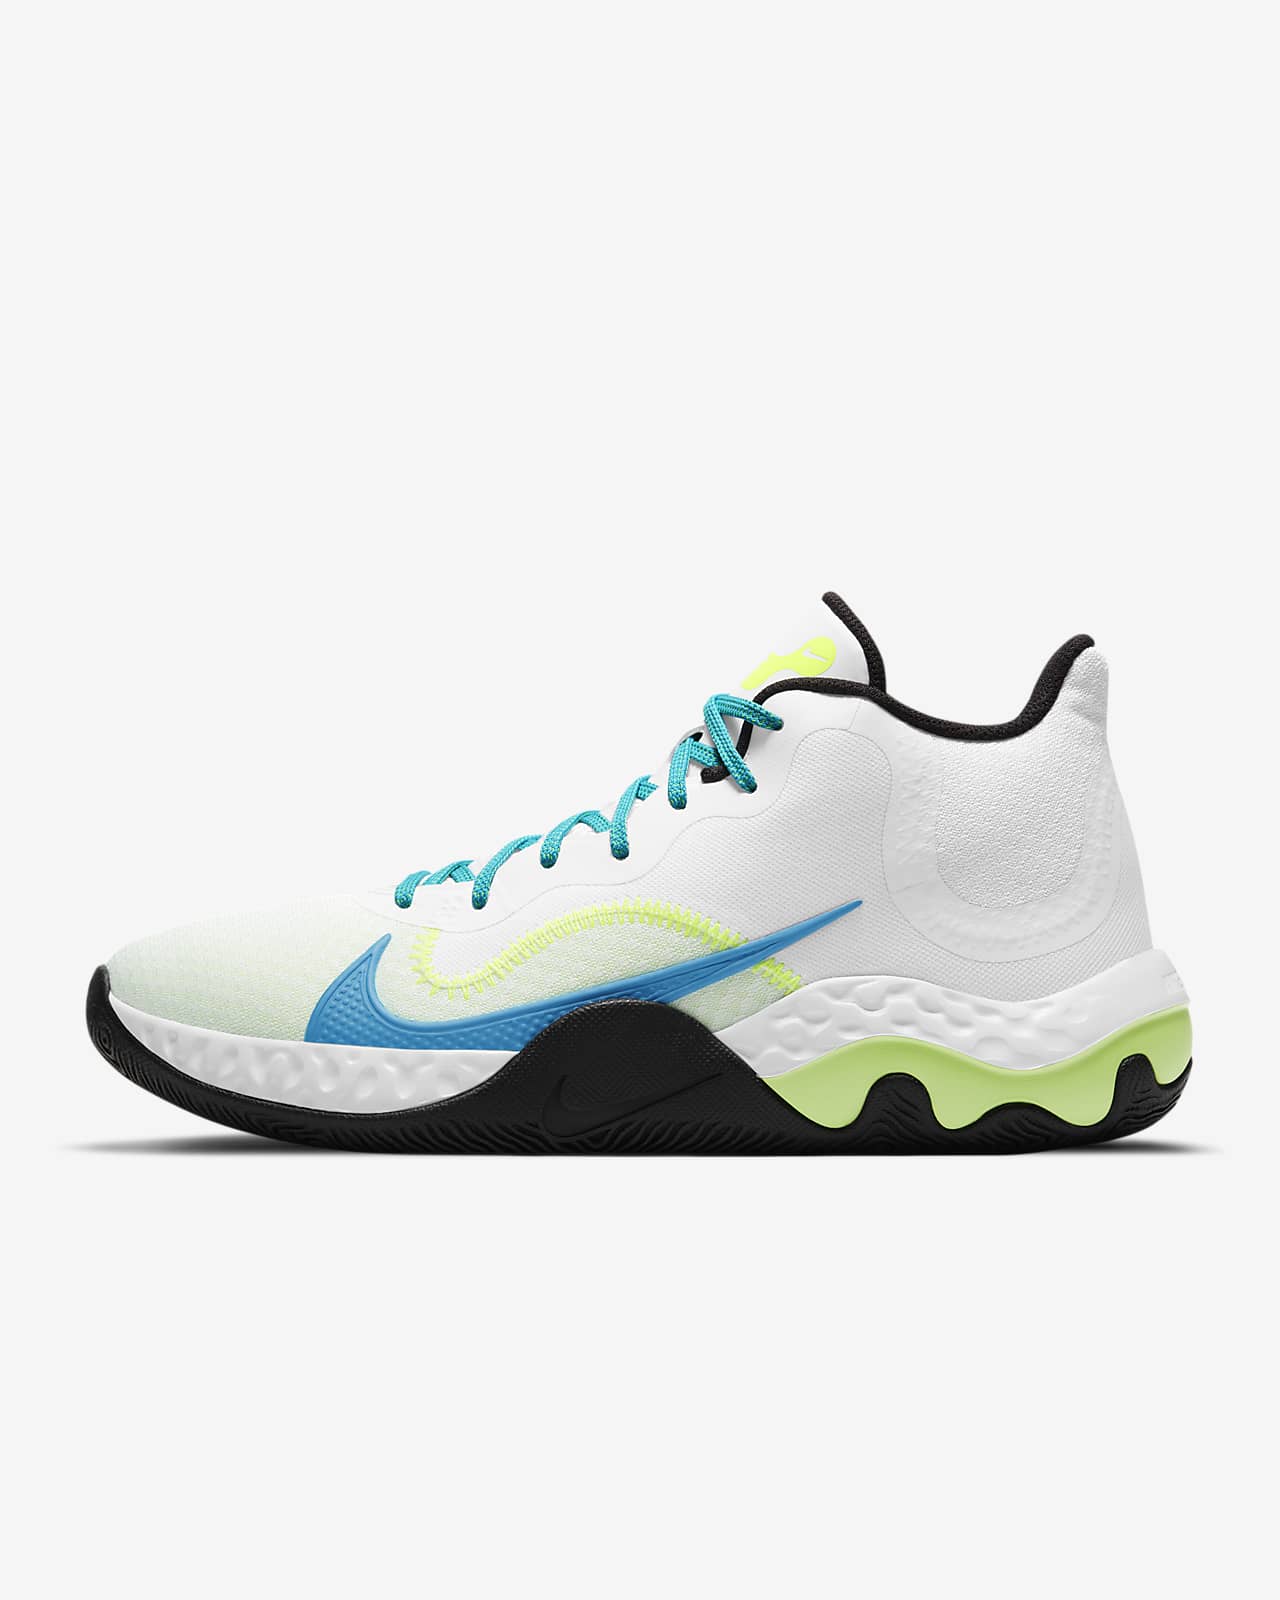 nike bball shoes